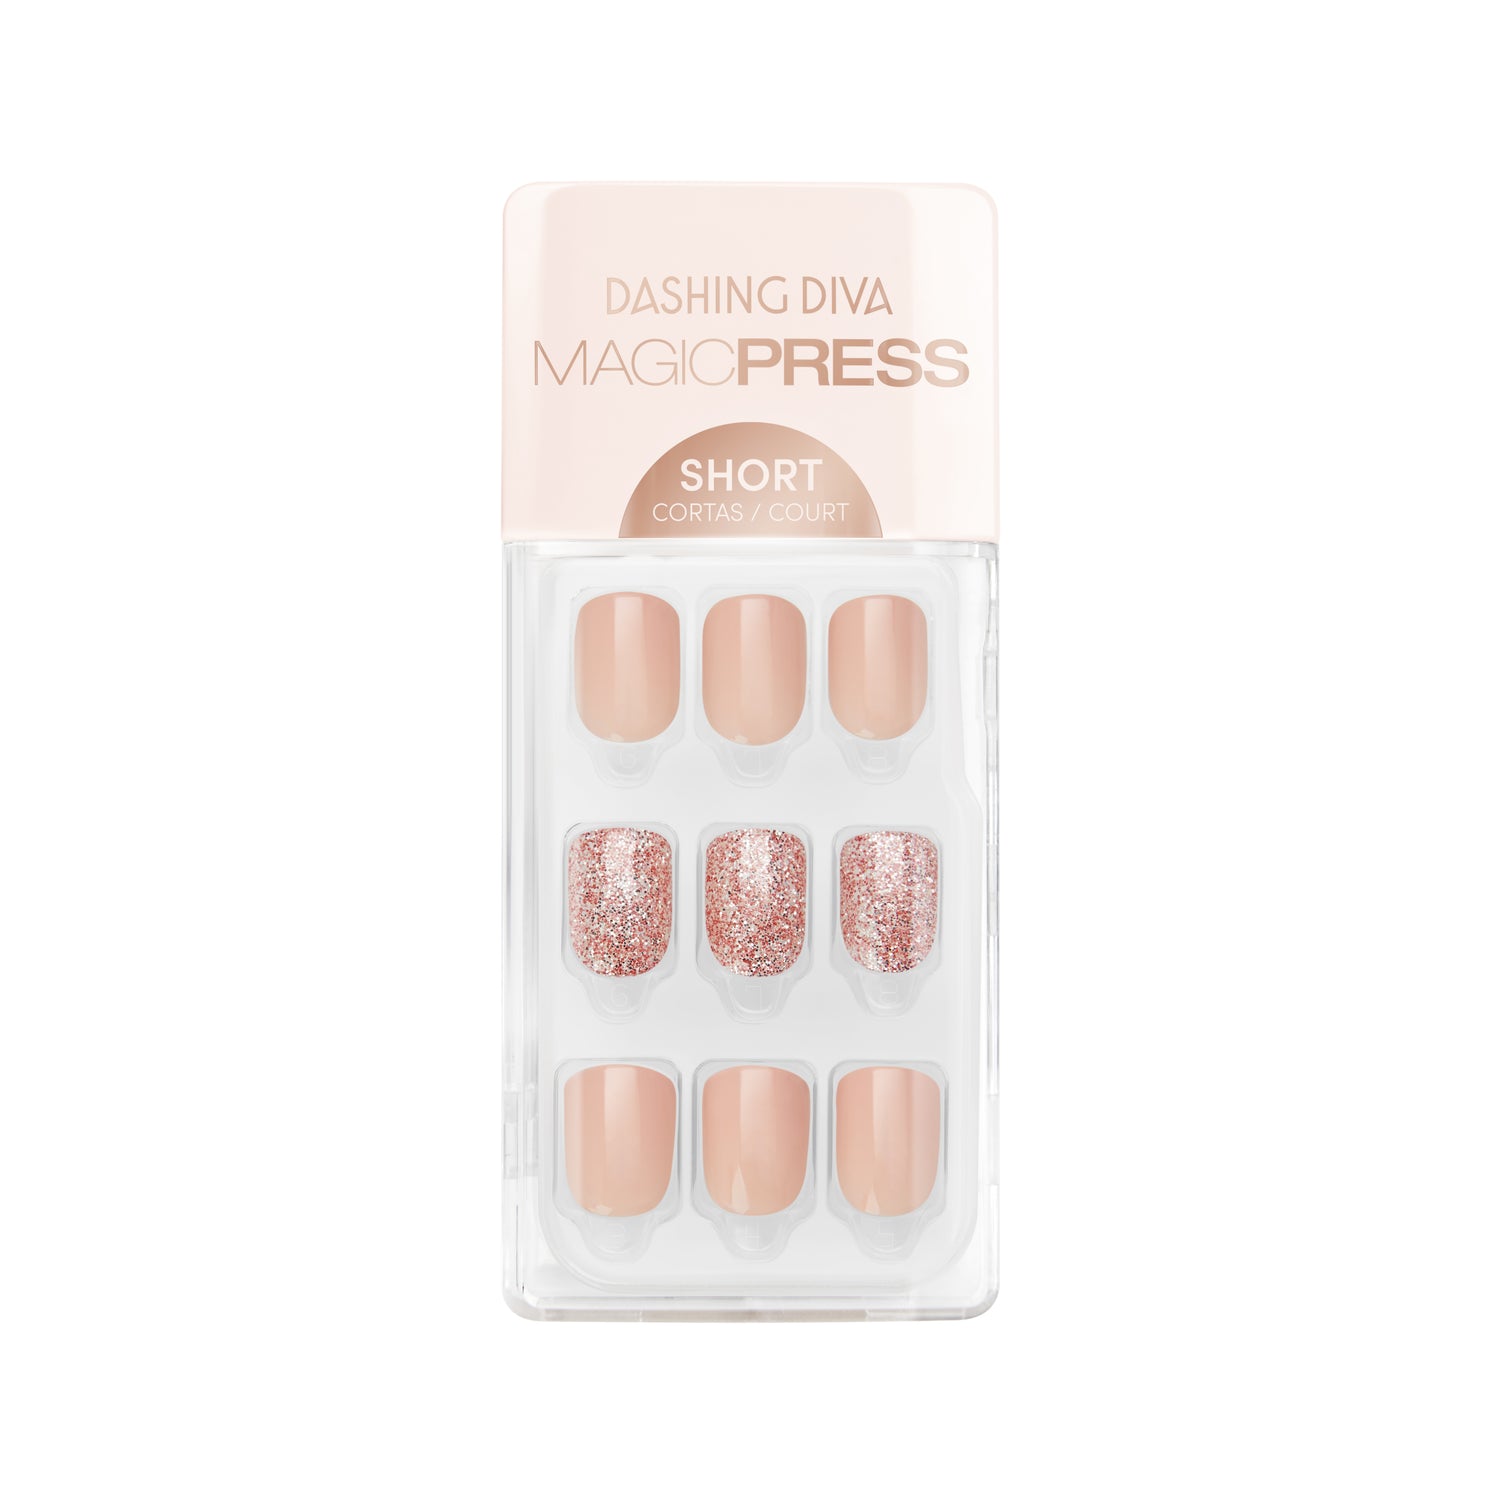 Dashing Diva MAGIC PRESS short, square neutral press on gel nails with pink glitter accents.